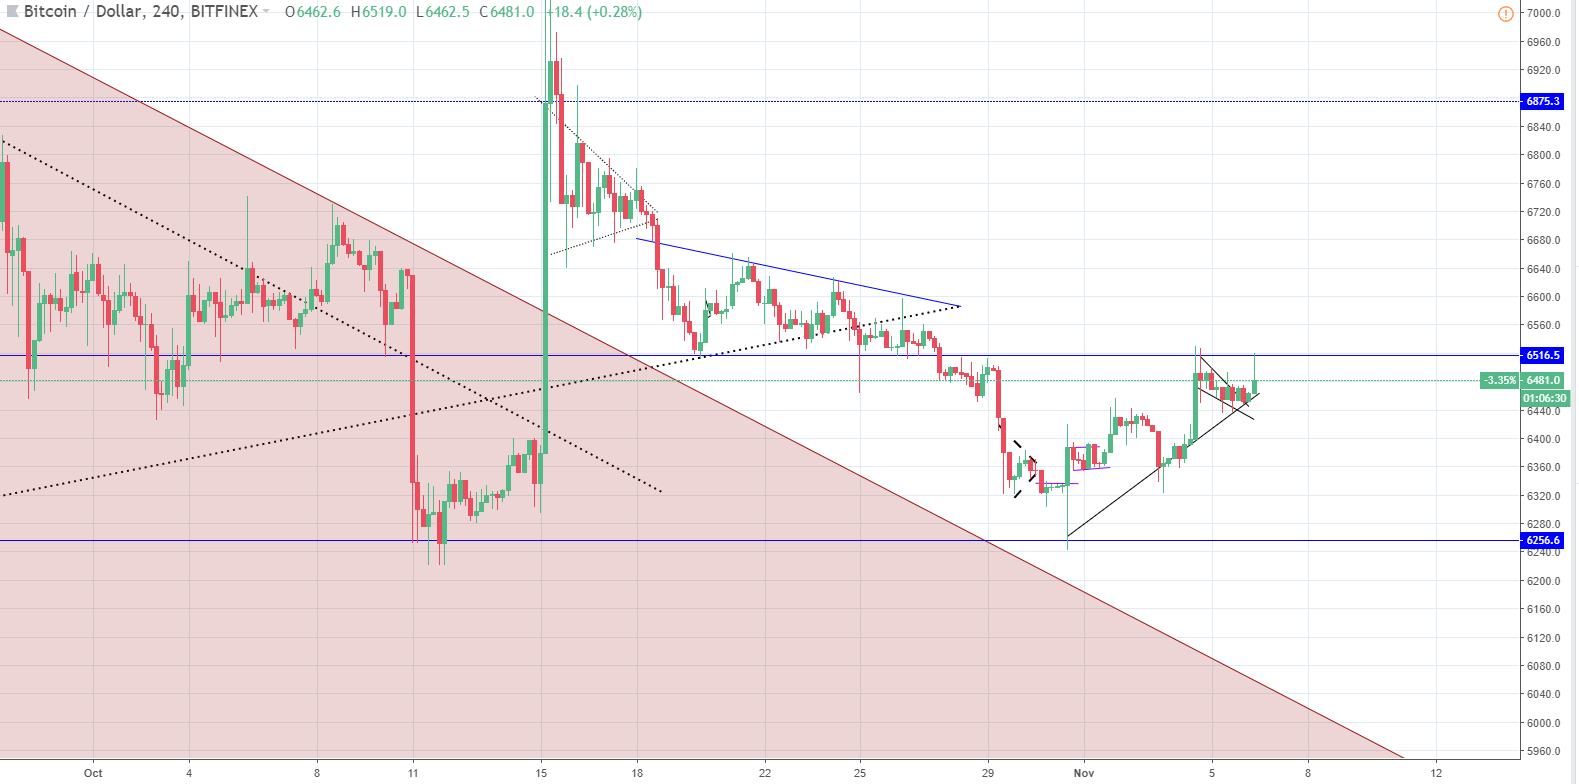 BTC/USD still under pressure while XRP/USD increased by over 18%